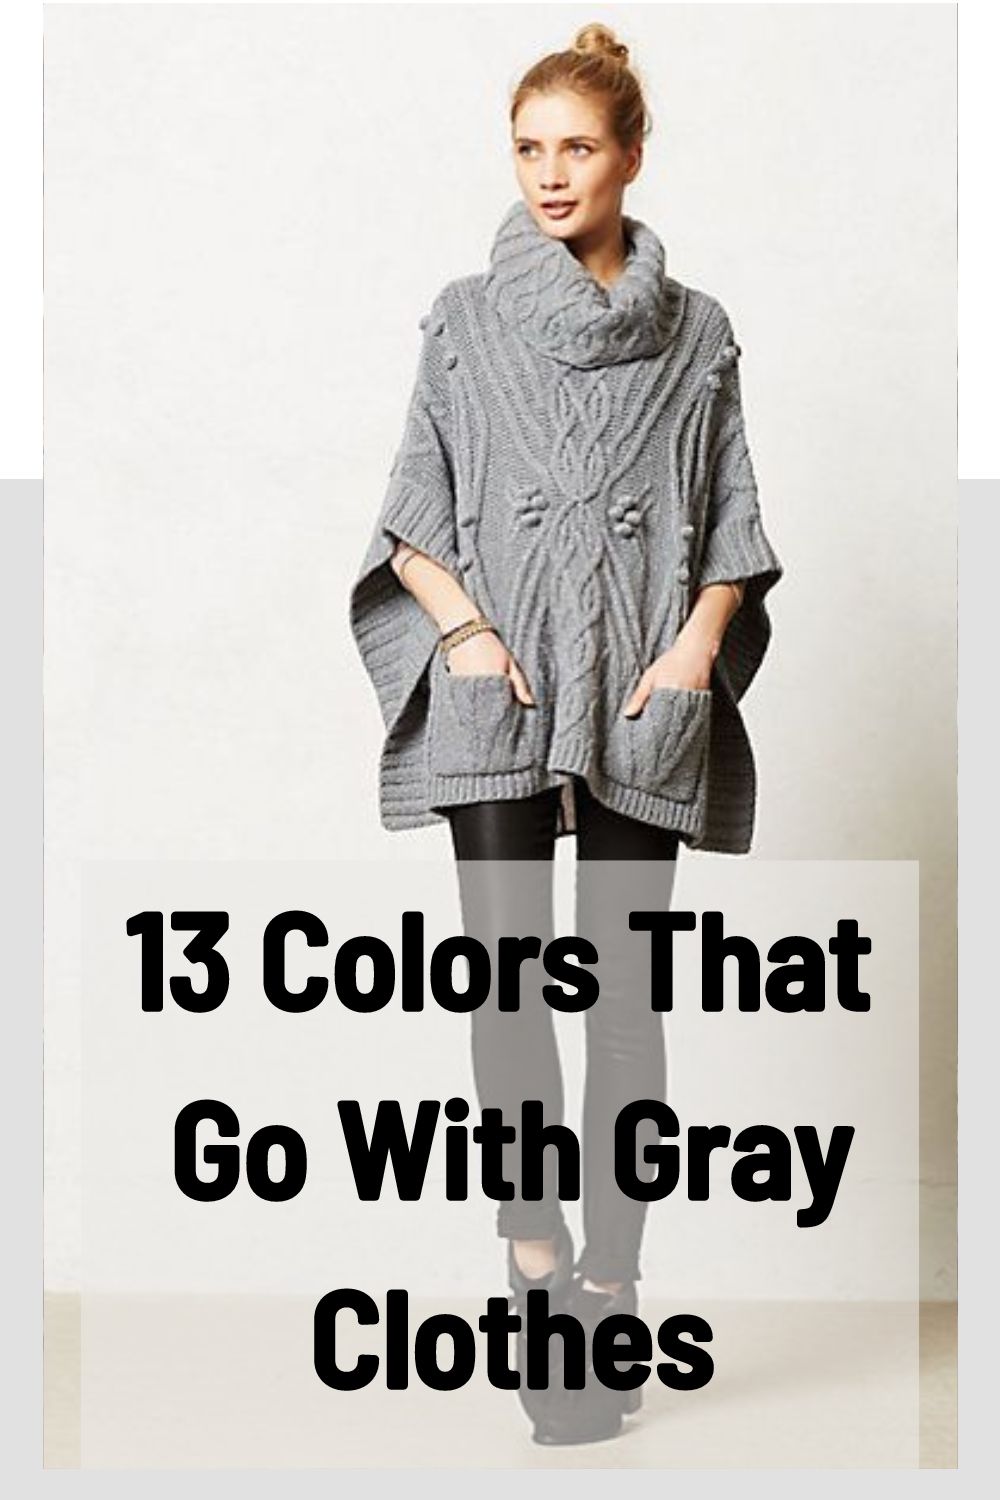 13 Colors That Go With Gray Clothes